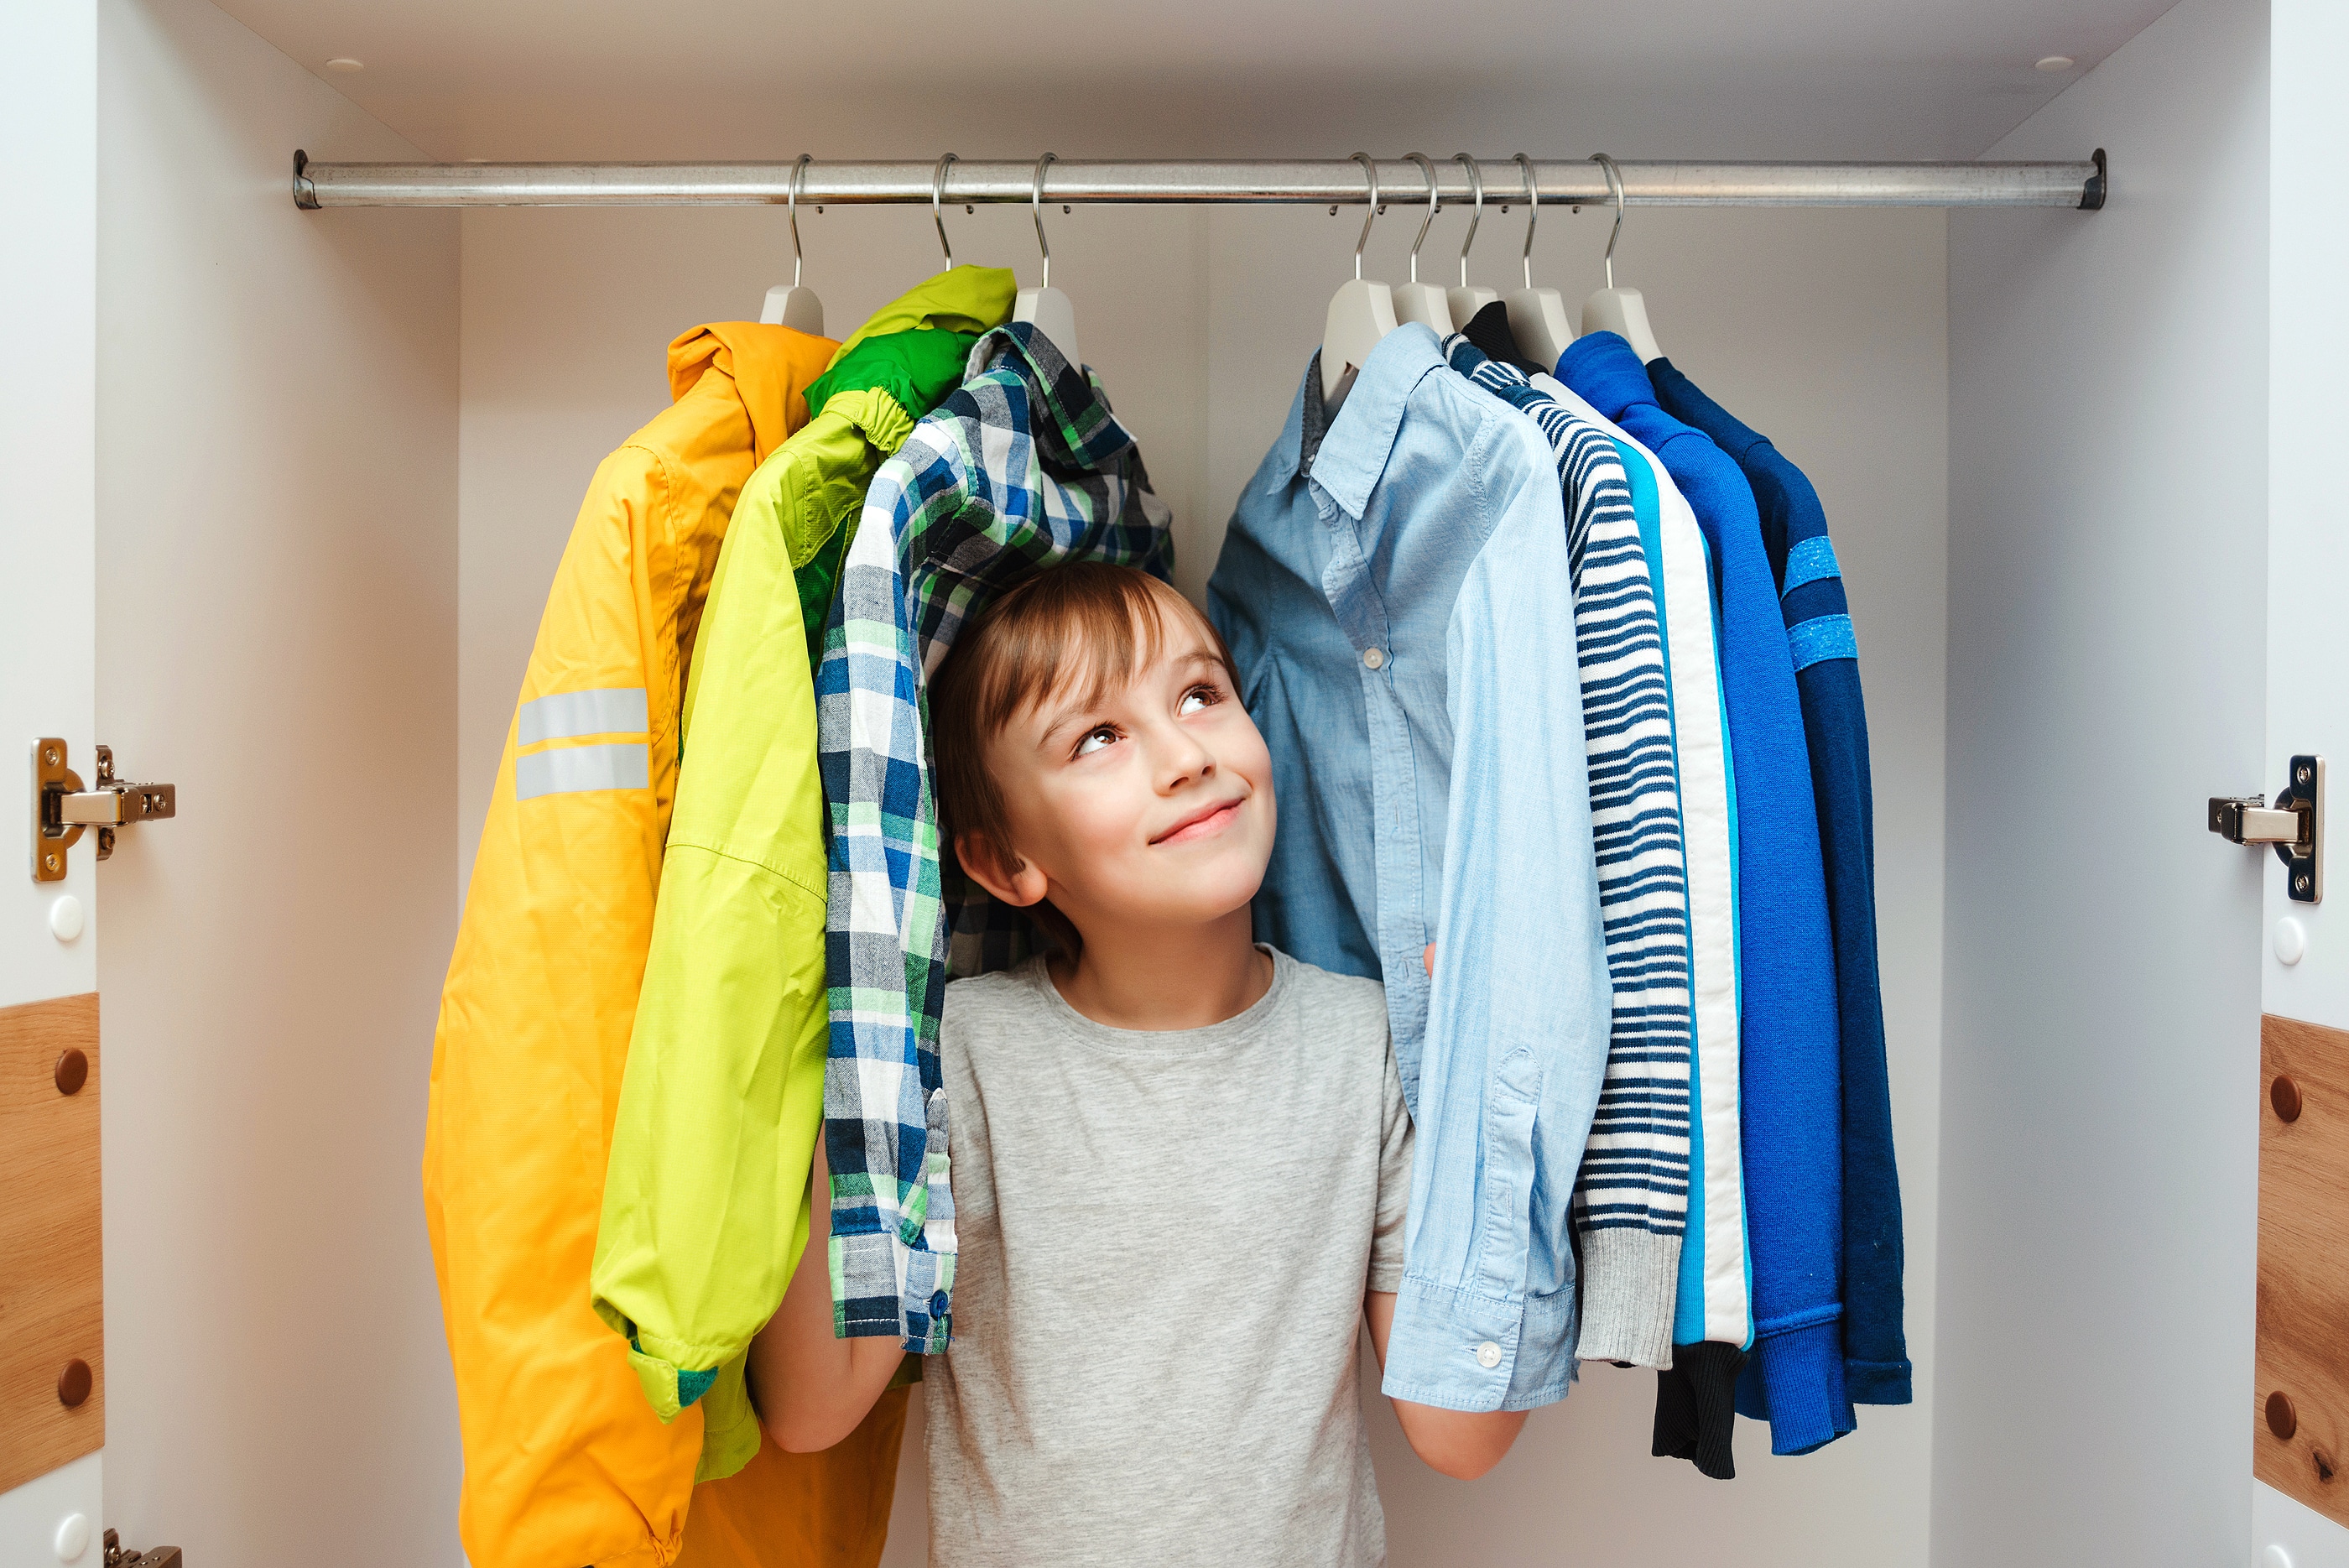 How to Make Organizing Fun for Kids